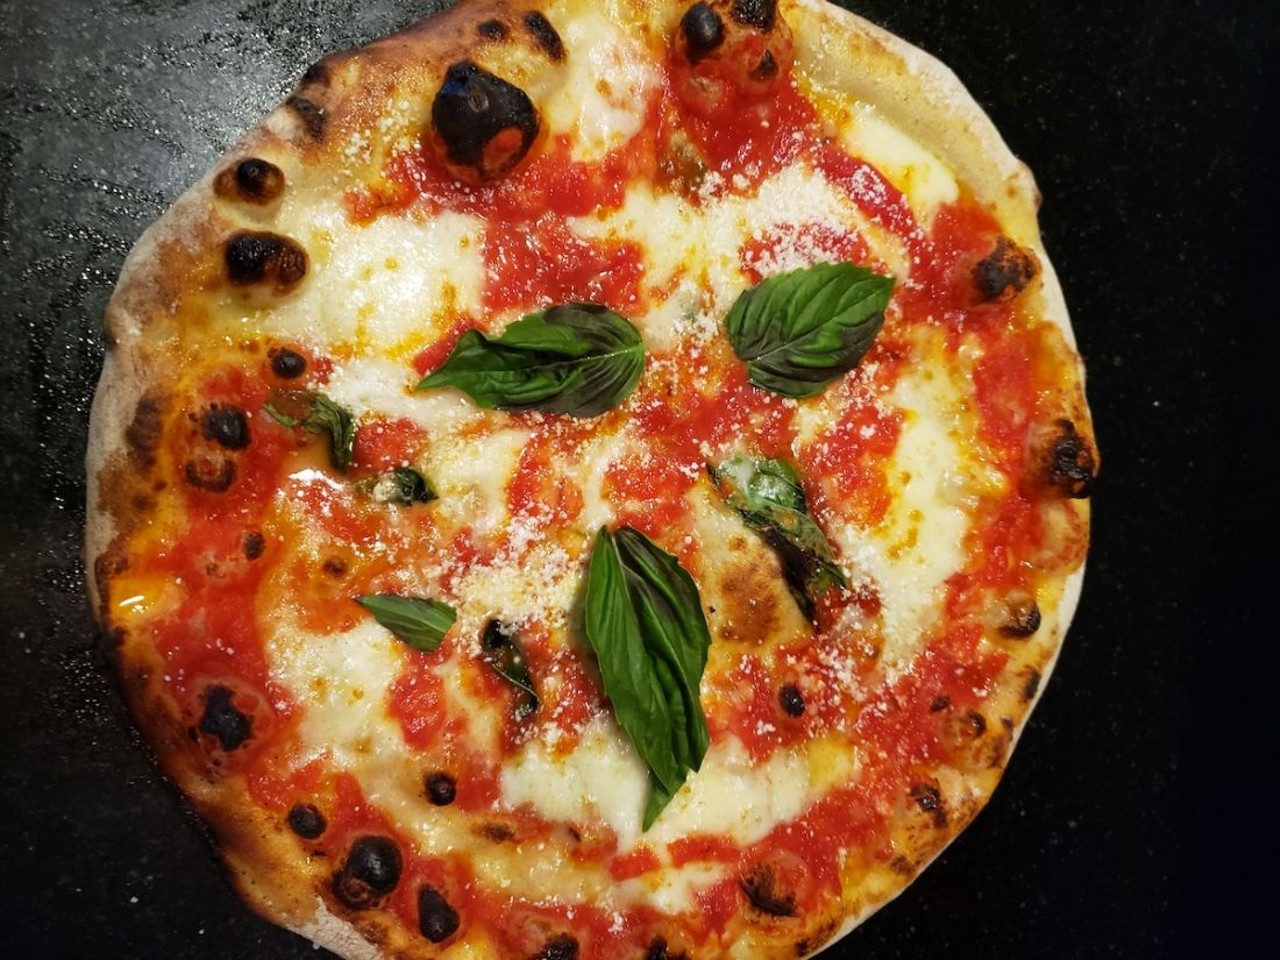  Biga Wood Fired Pizzeria
9145 Chillicothe Rd., Kirtland
Biga Wood Fired Pizzeria in Kirtland is offering their 12 inch margherita pizza for PIzza Week. The pizza comes with tomato sauce, basil, garlic and fresh mozzarella.
Photo Provided